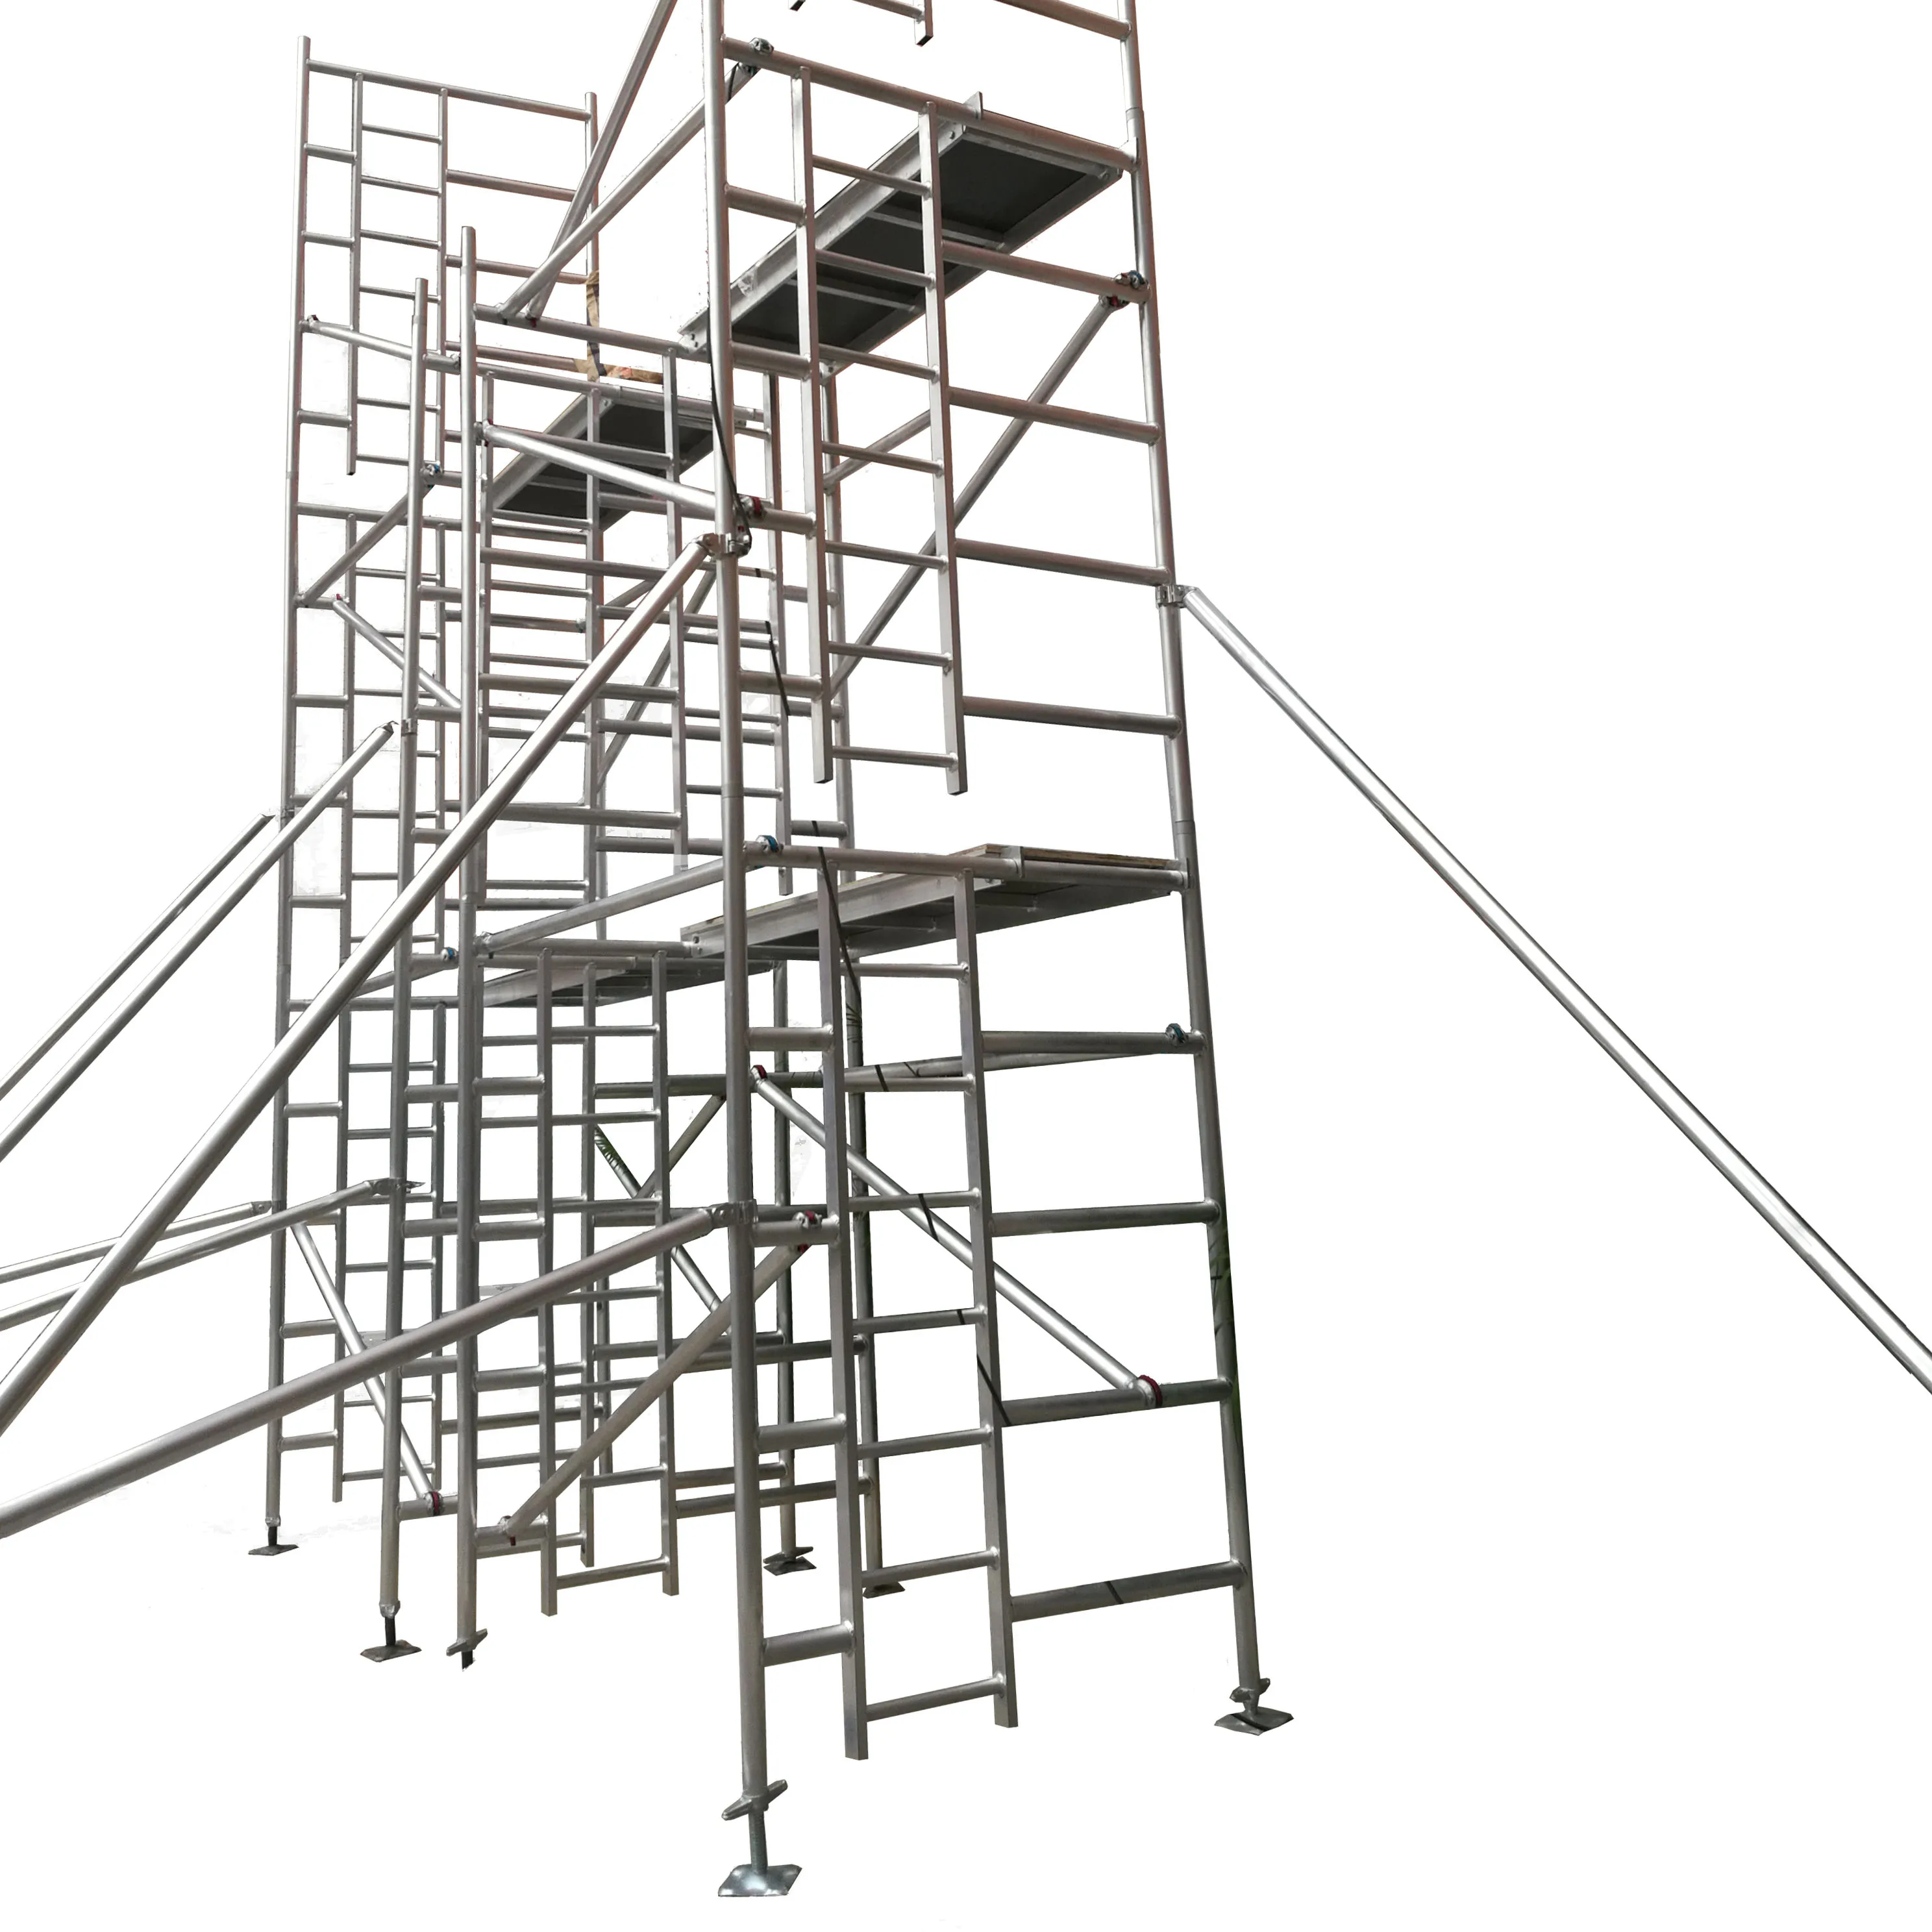 Dragonstage Construction Aluminium Frame Scaffold Movable Scaffolding for sale